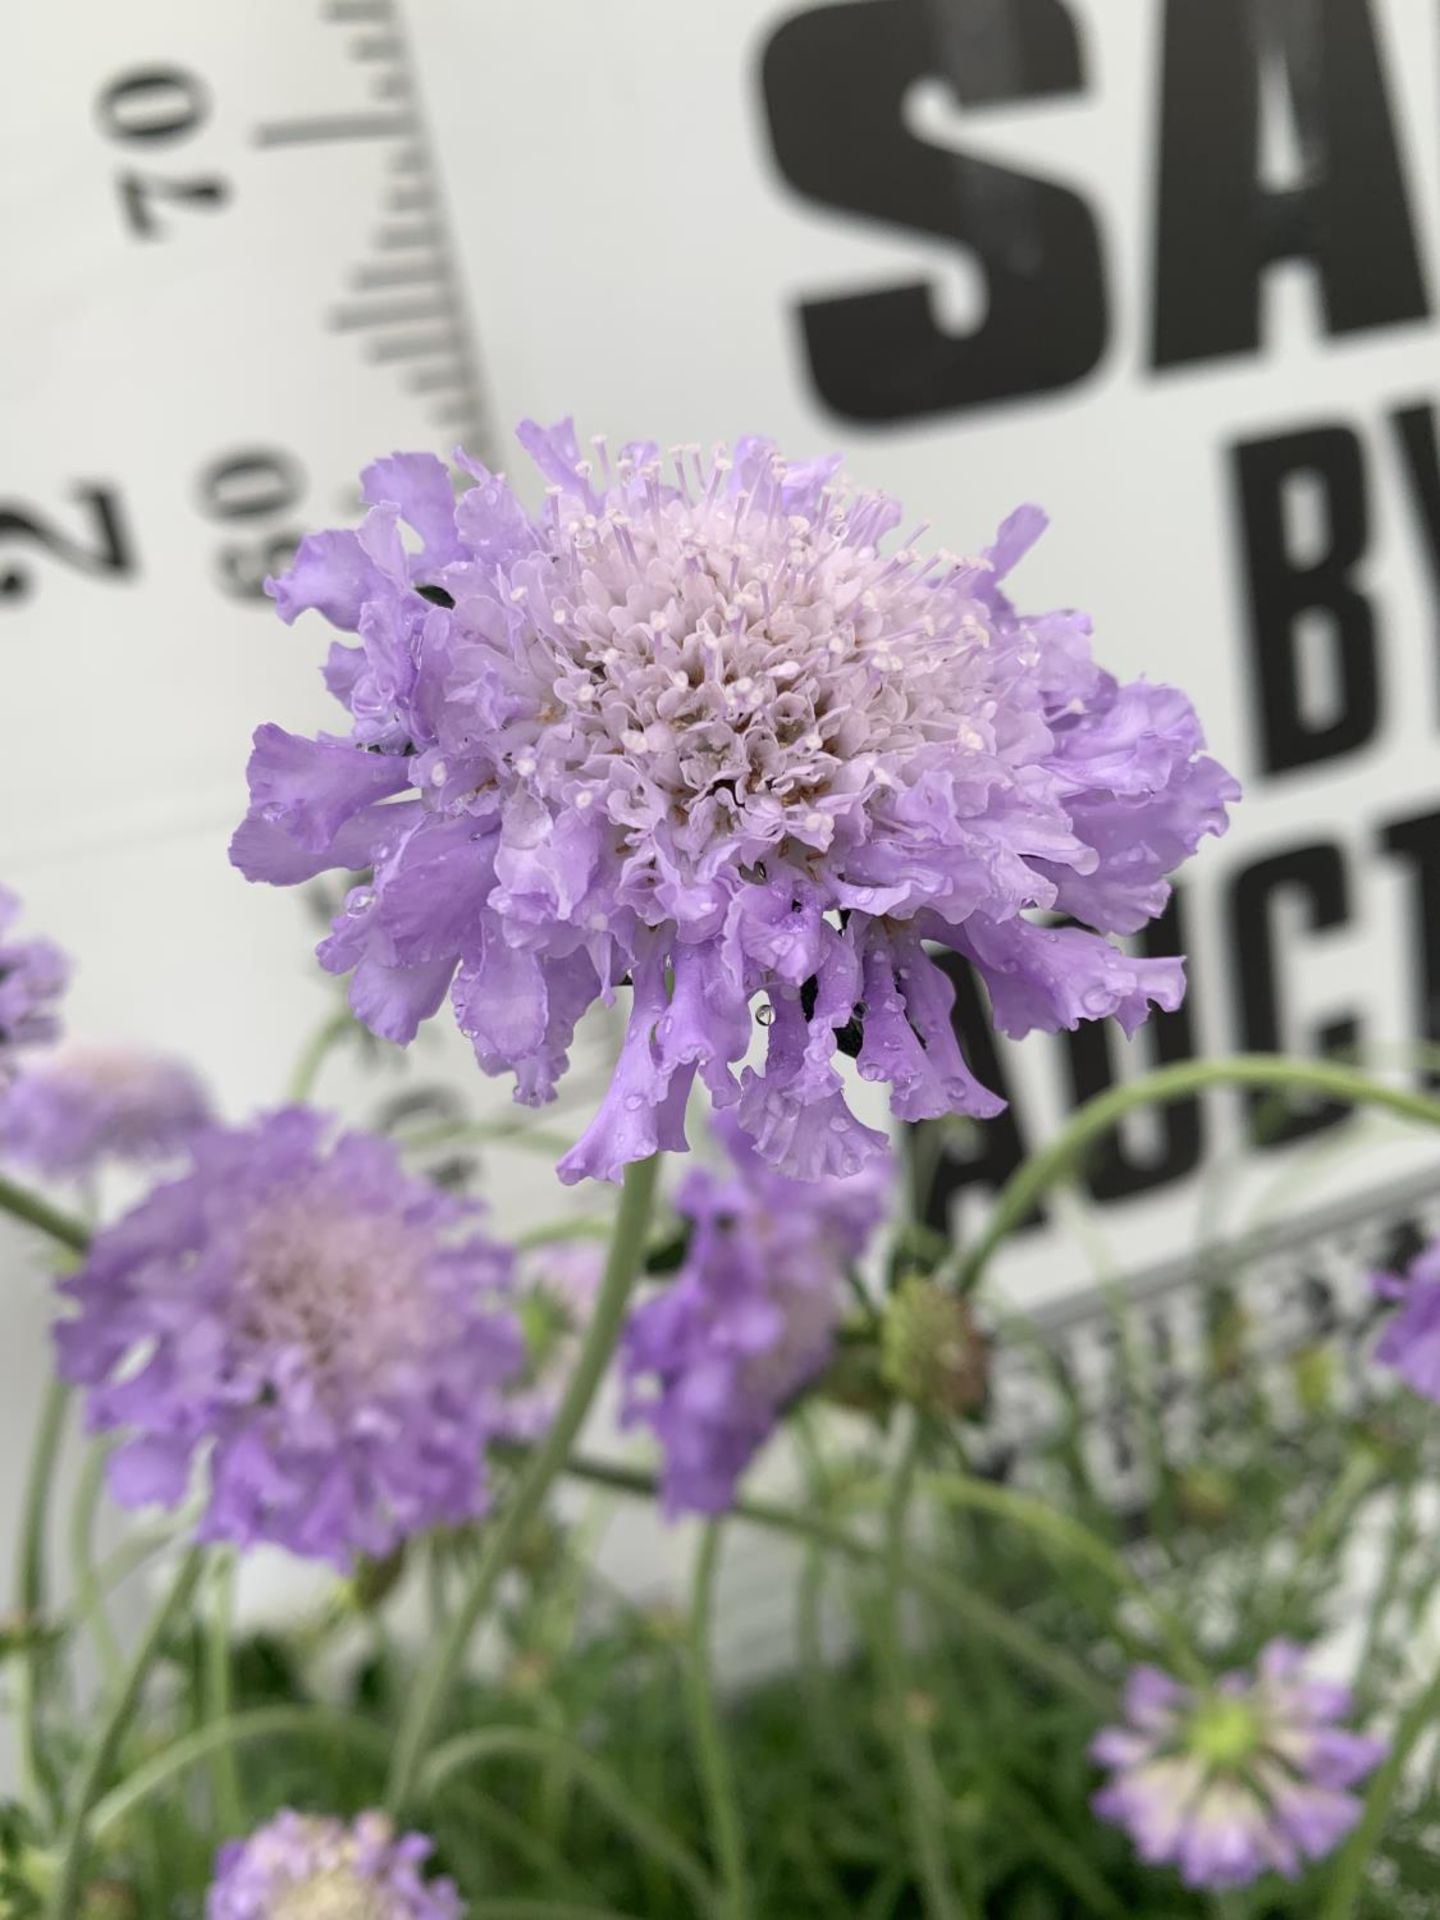 SIX SCABIOSA BUTTERFLY BLUE IN 2 LTR POTS 50-60CM TALL TO BE SOLD FOR THE SIX PLUS VAT - Bild 3 aus 5